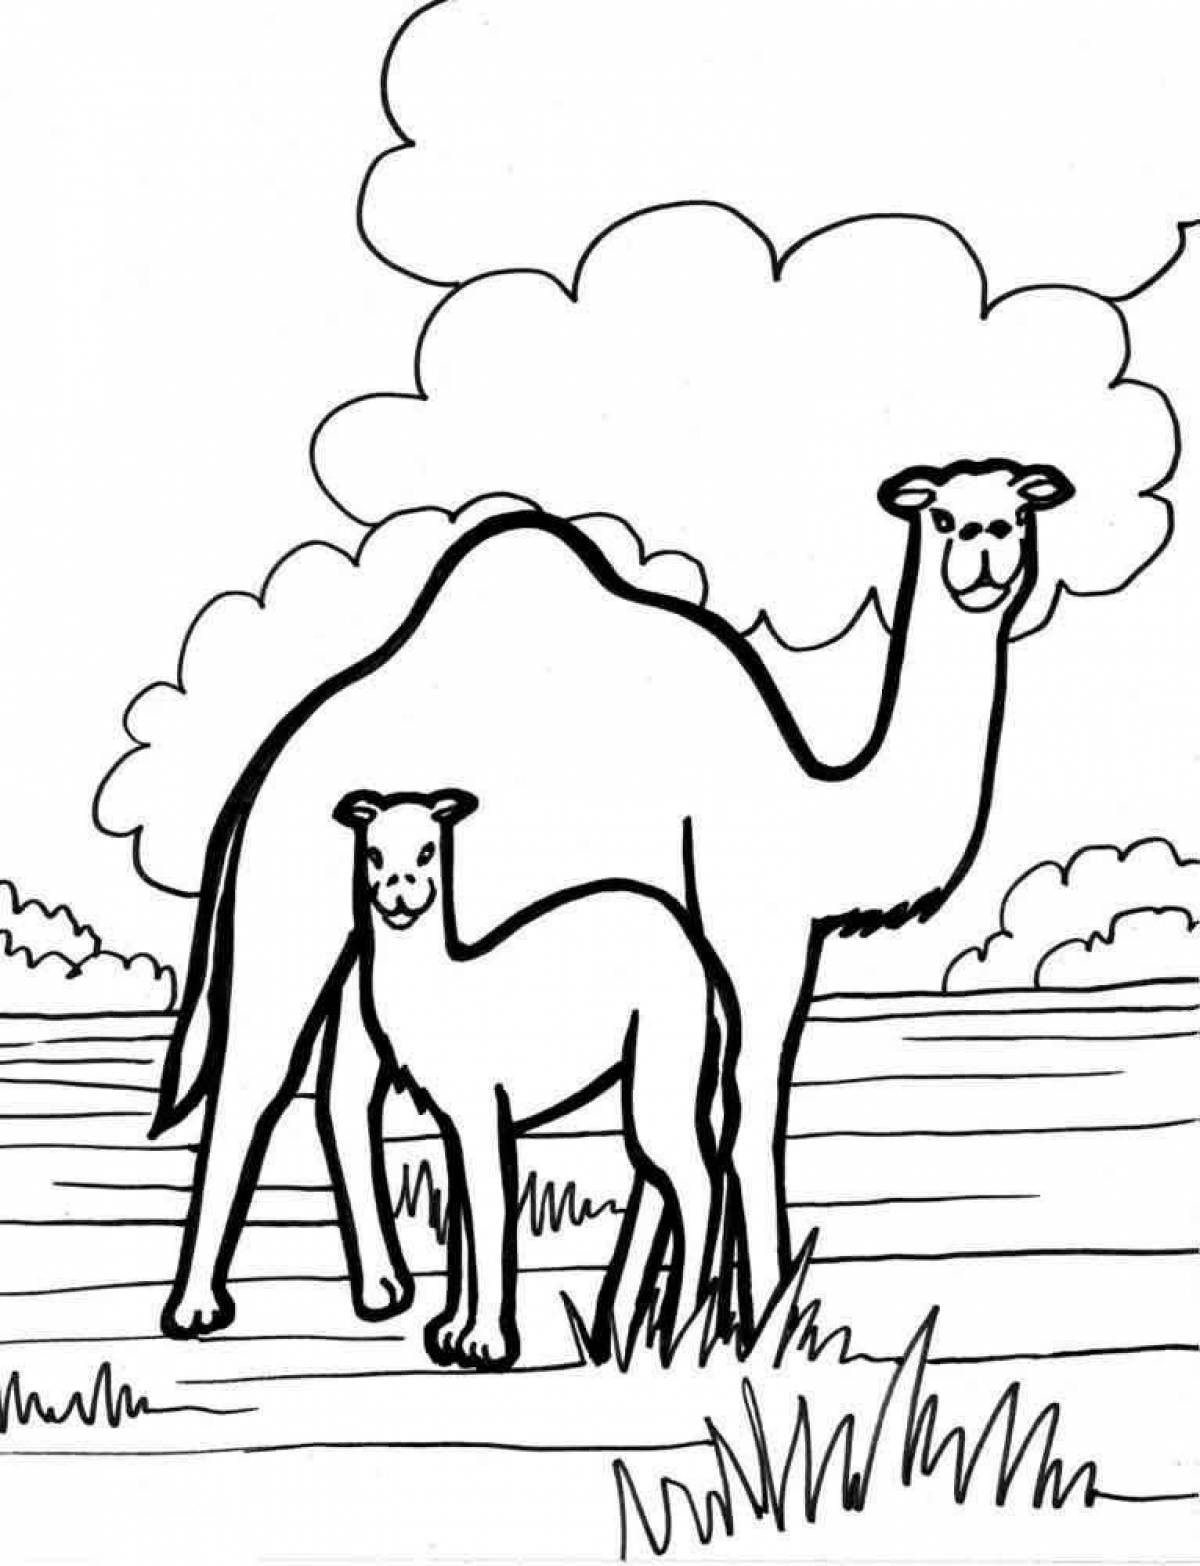 Outstanding camel coloring page for kids